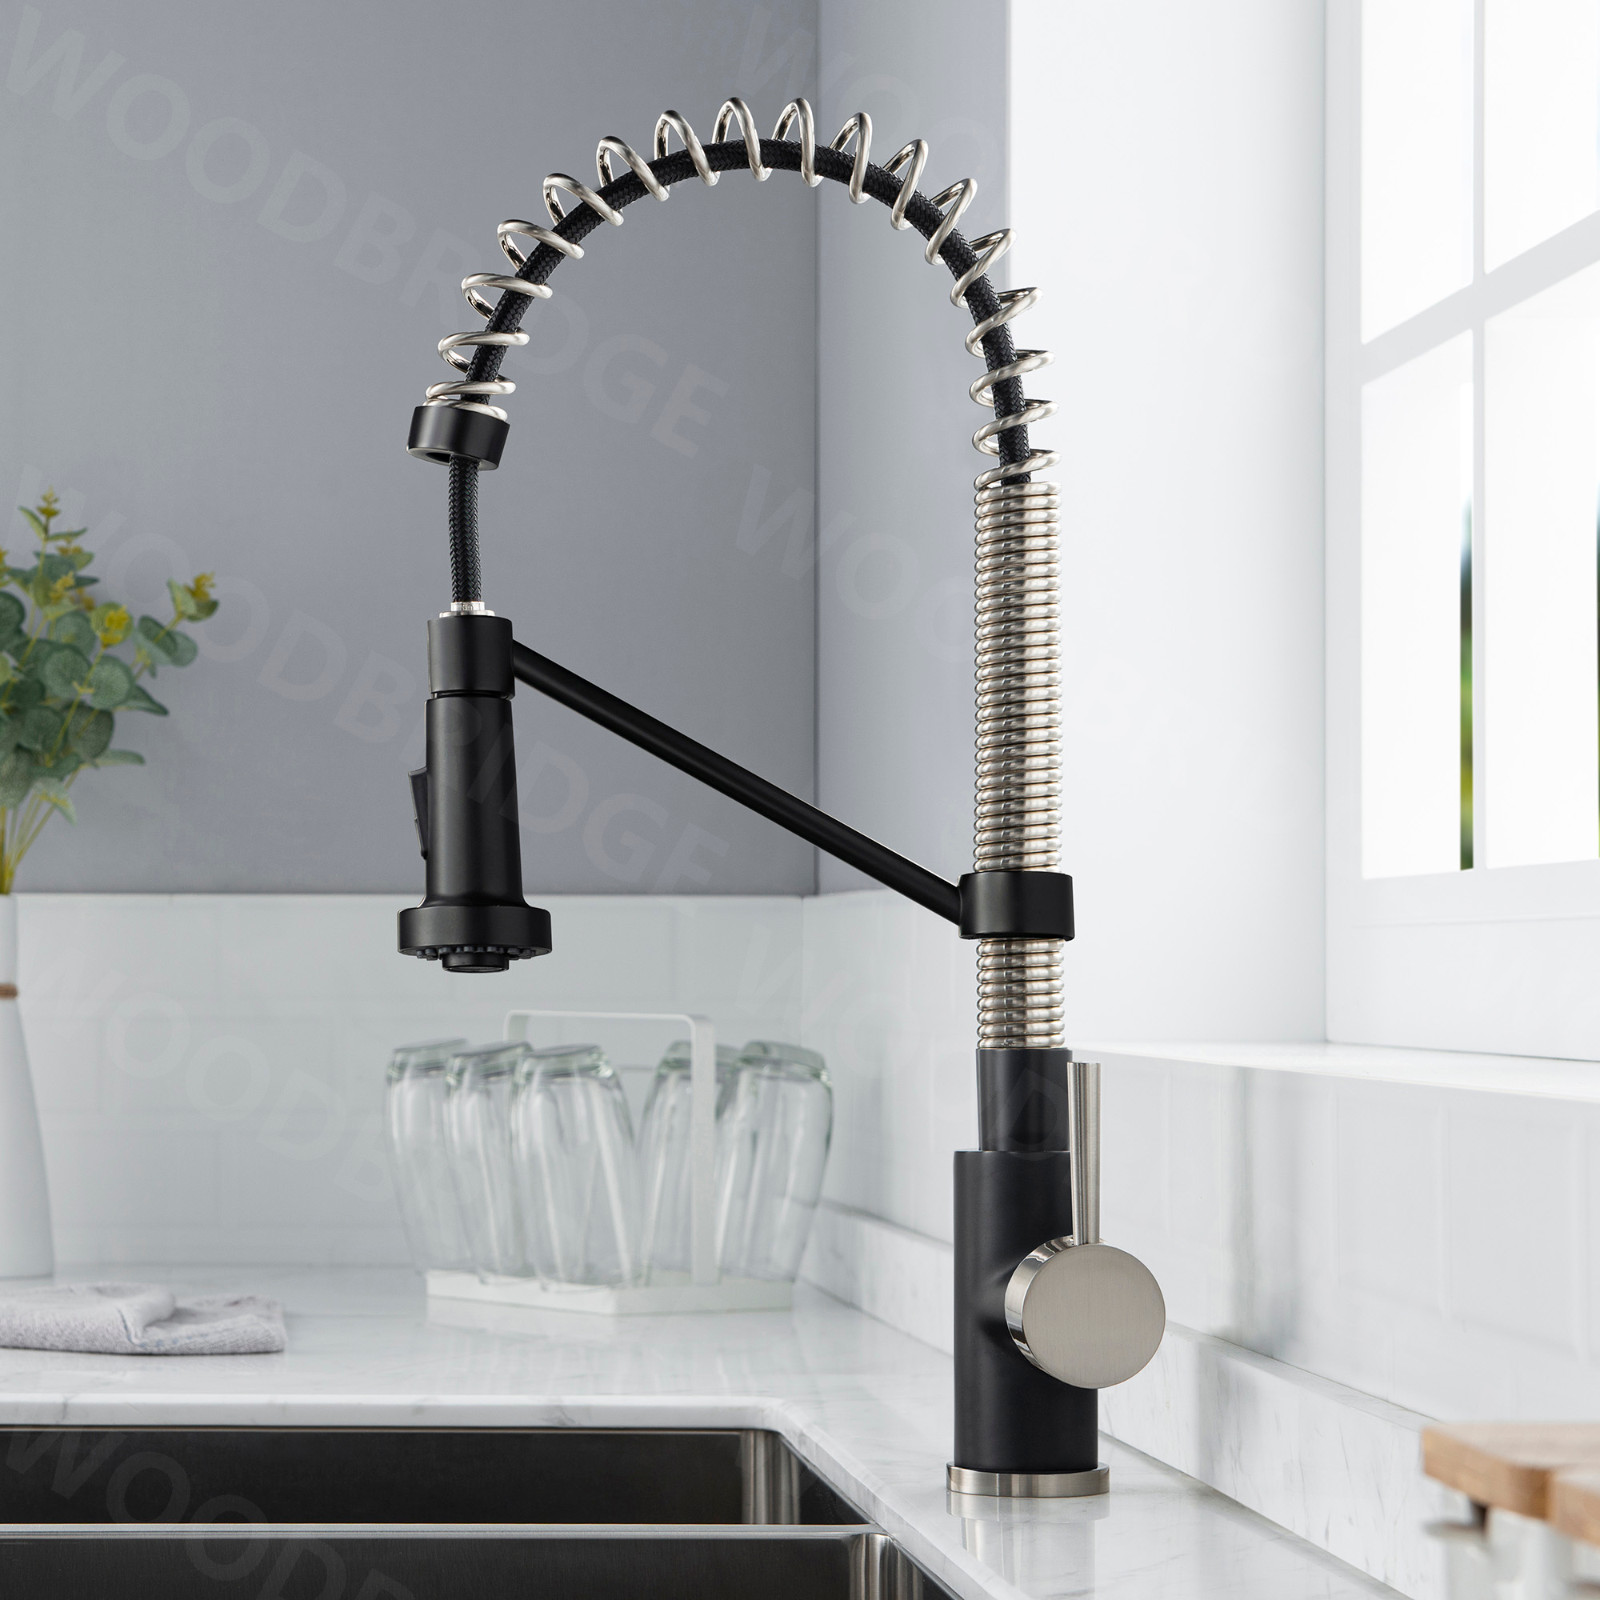  WOODBRIDGE WK010203BL Stainless Steel Single Handle Spring Coil Pre-Rinse Kitchen Faucet with Pull Down Sprayer, Matte Black Finish_9460